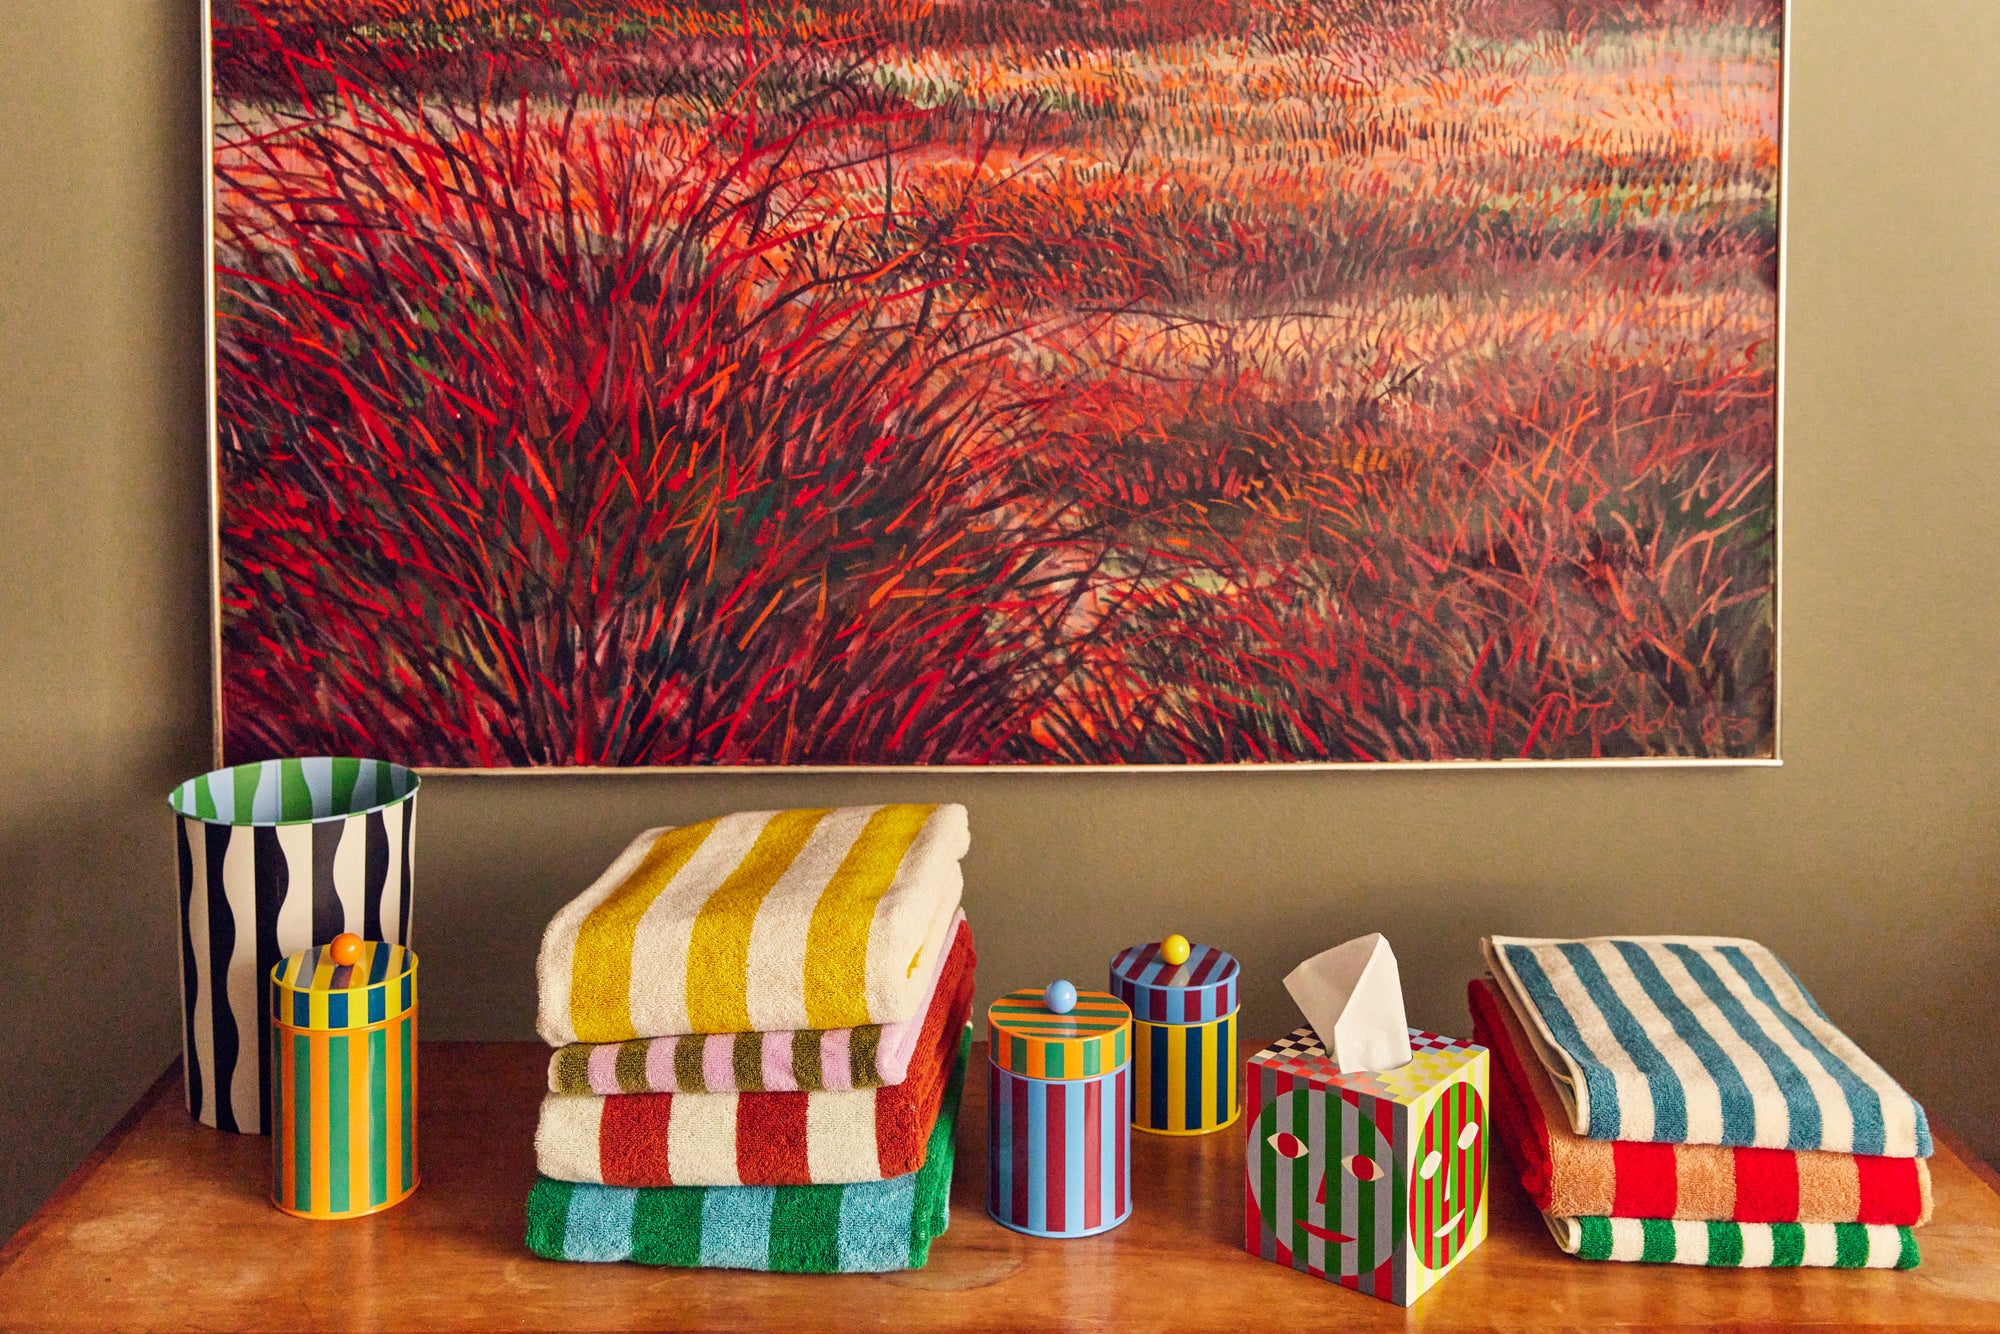 Tableau of Dusen Dusen bath towels, Dusen Dusen canisters, and Dusen Dusen tissue box sit on top of a bench in front of a red field painting